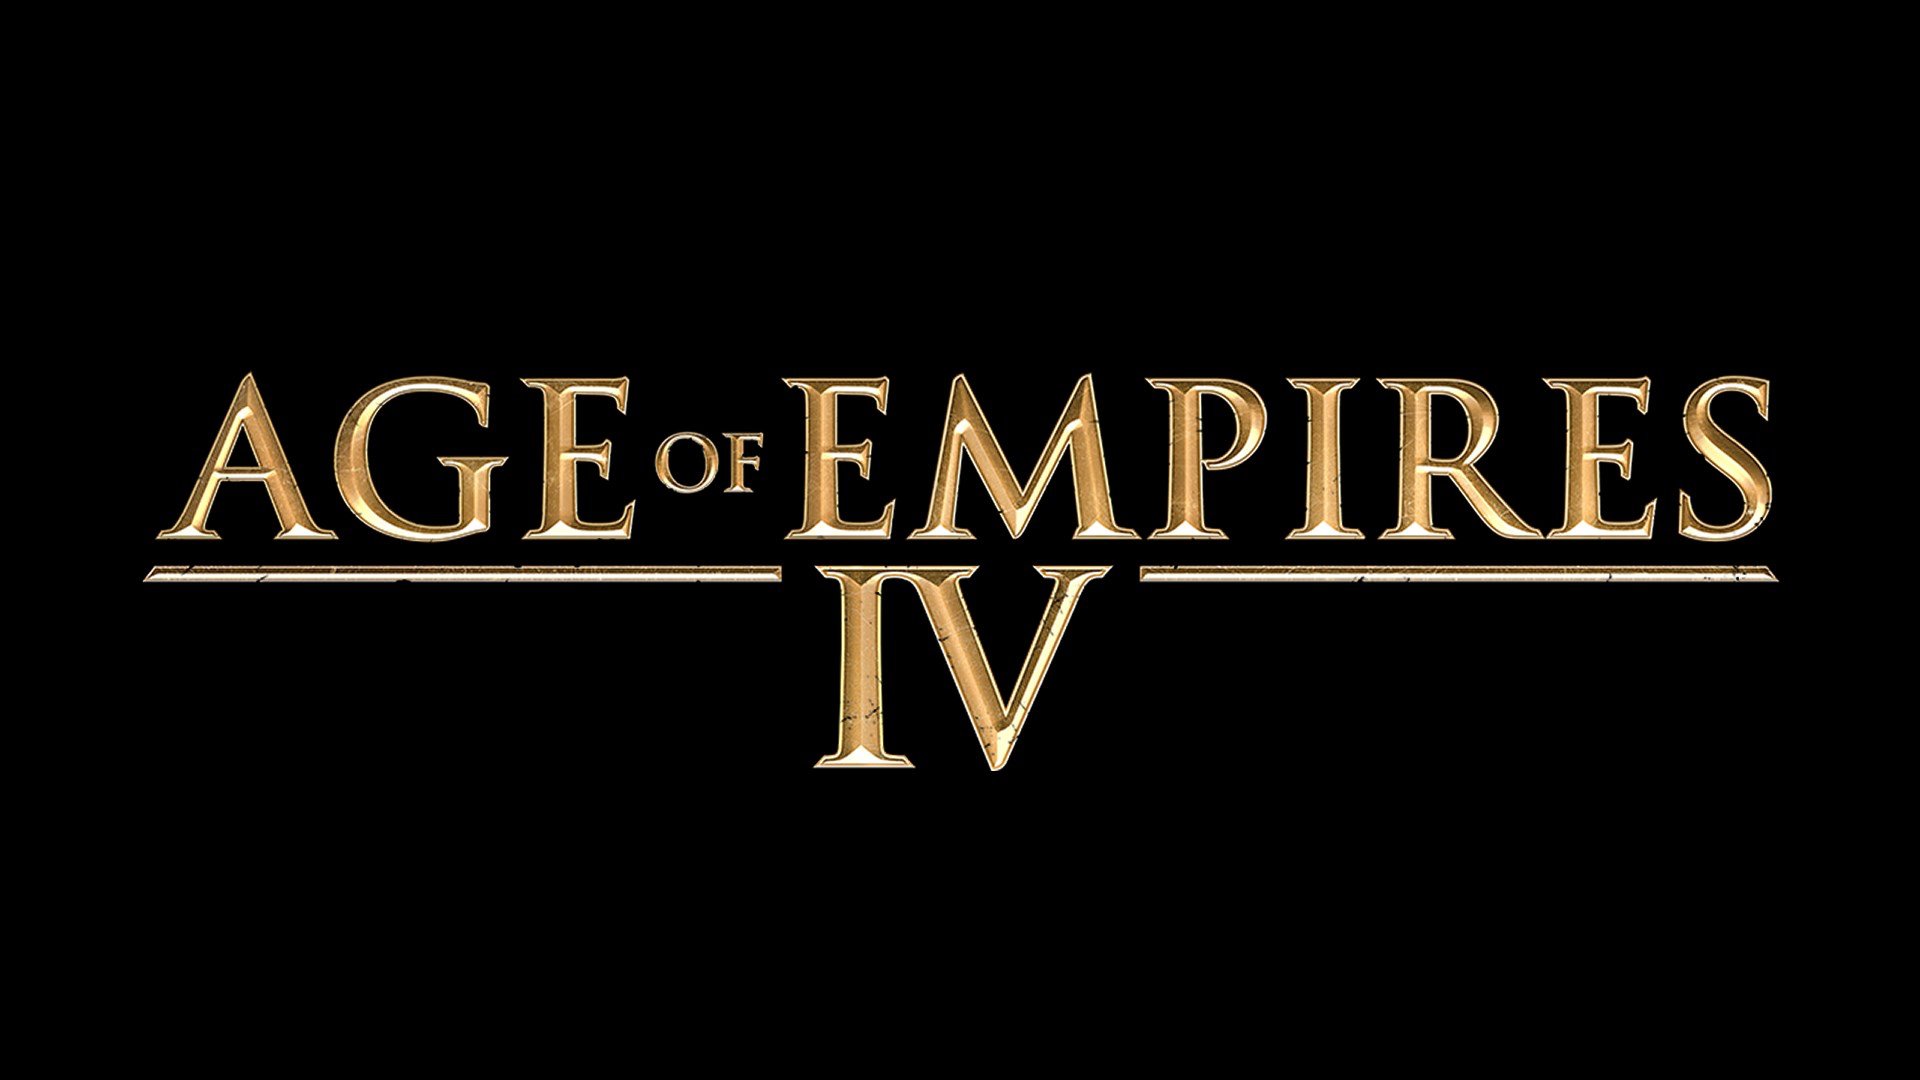 video game, age of empires iv